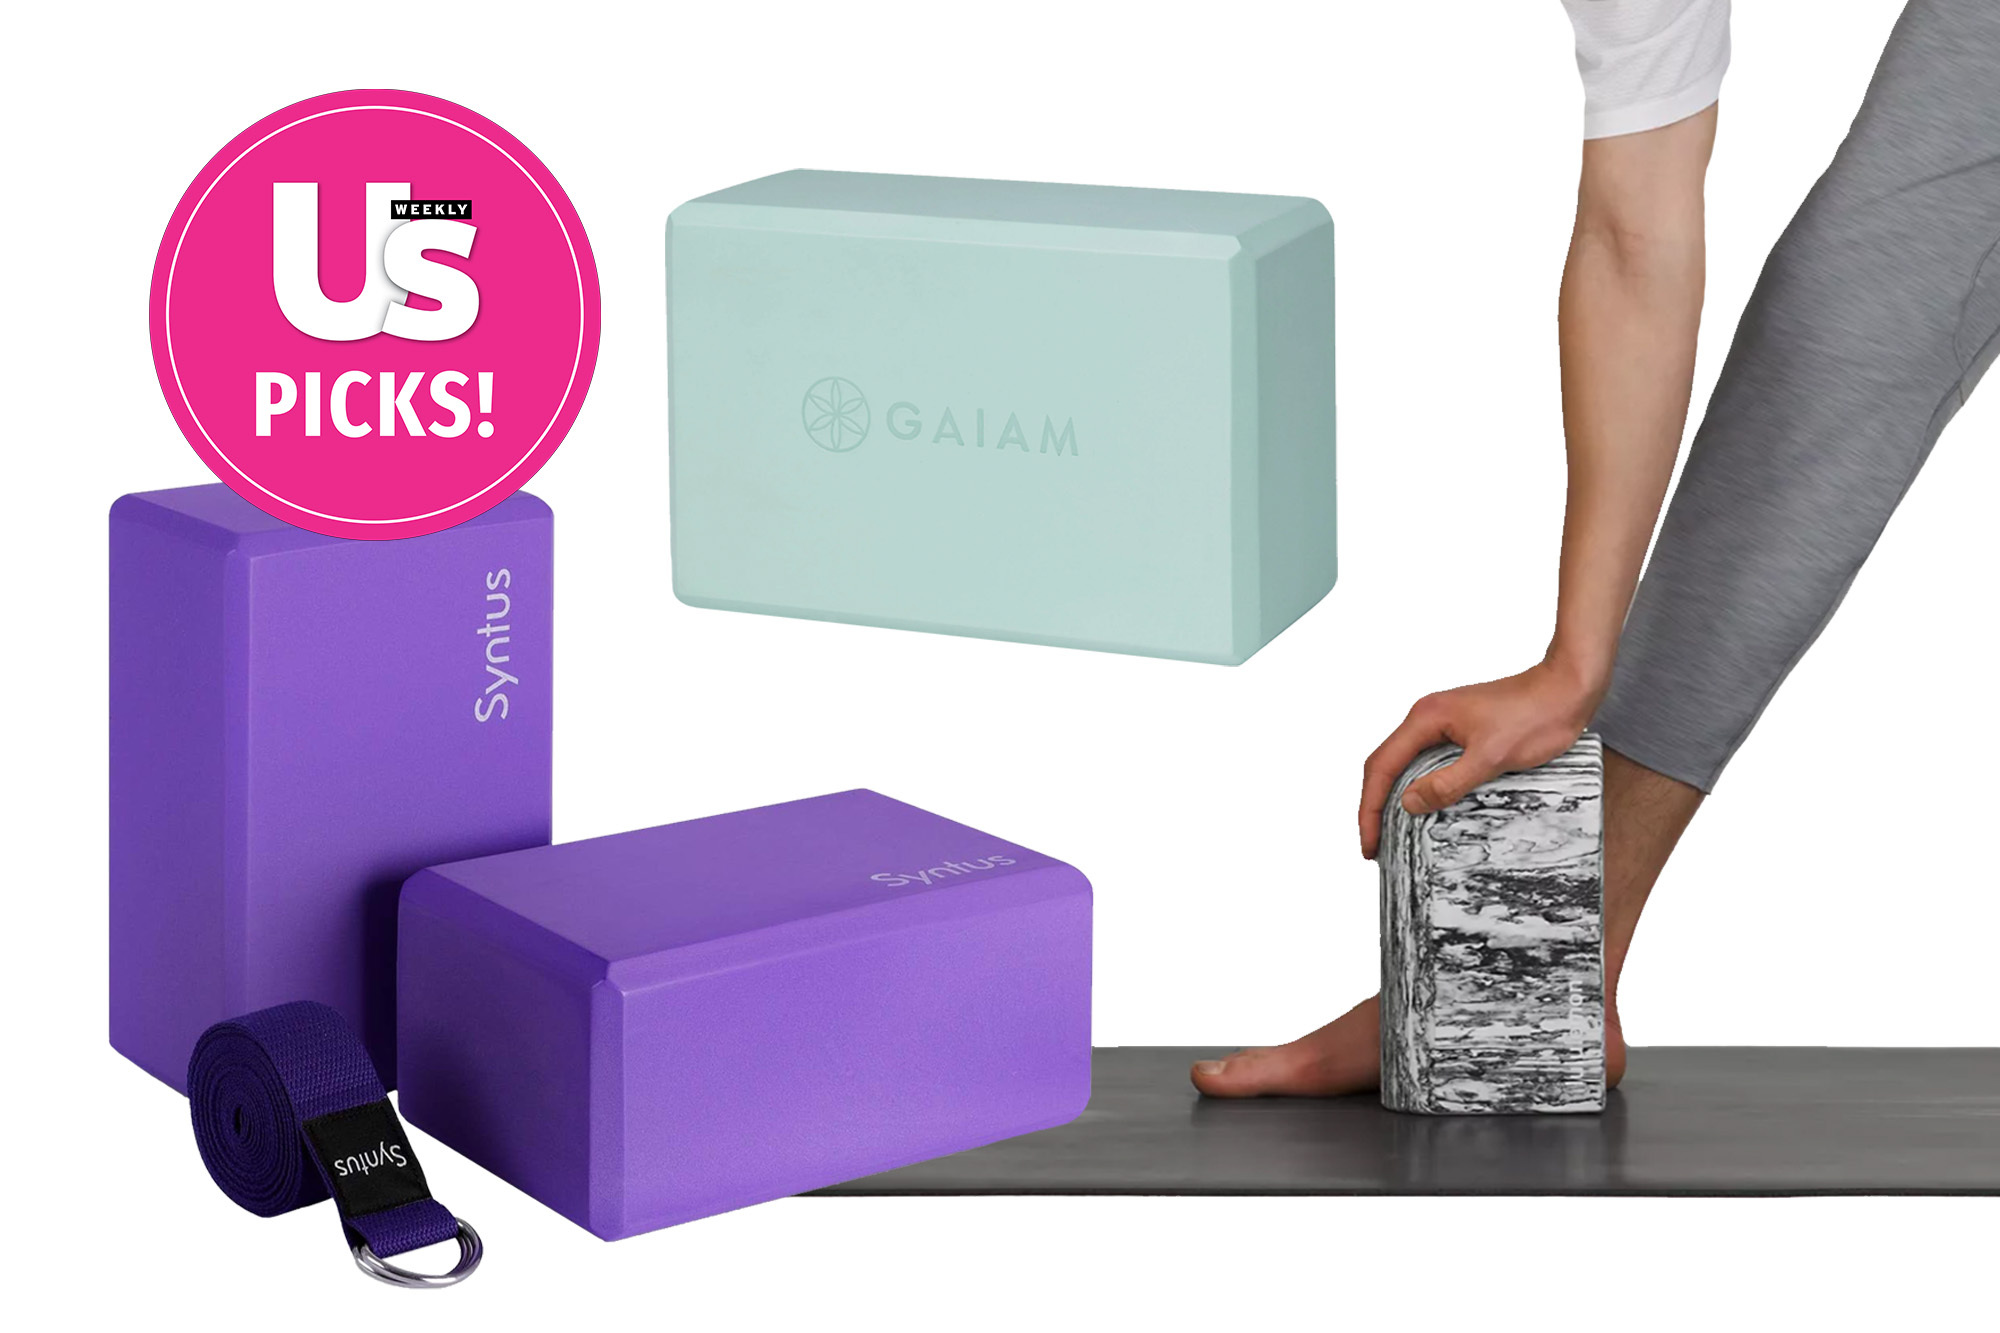 YOGA-GRIP - High Performance Yoga Blocks for Wrist Comfort, Support and  Alignment to Eliminate Wrist Pain - Excellent for Advanced and Basic Poses,  Balance and Stretching Assistance - Great for Yoga, Blocks 